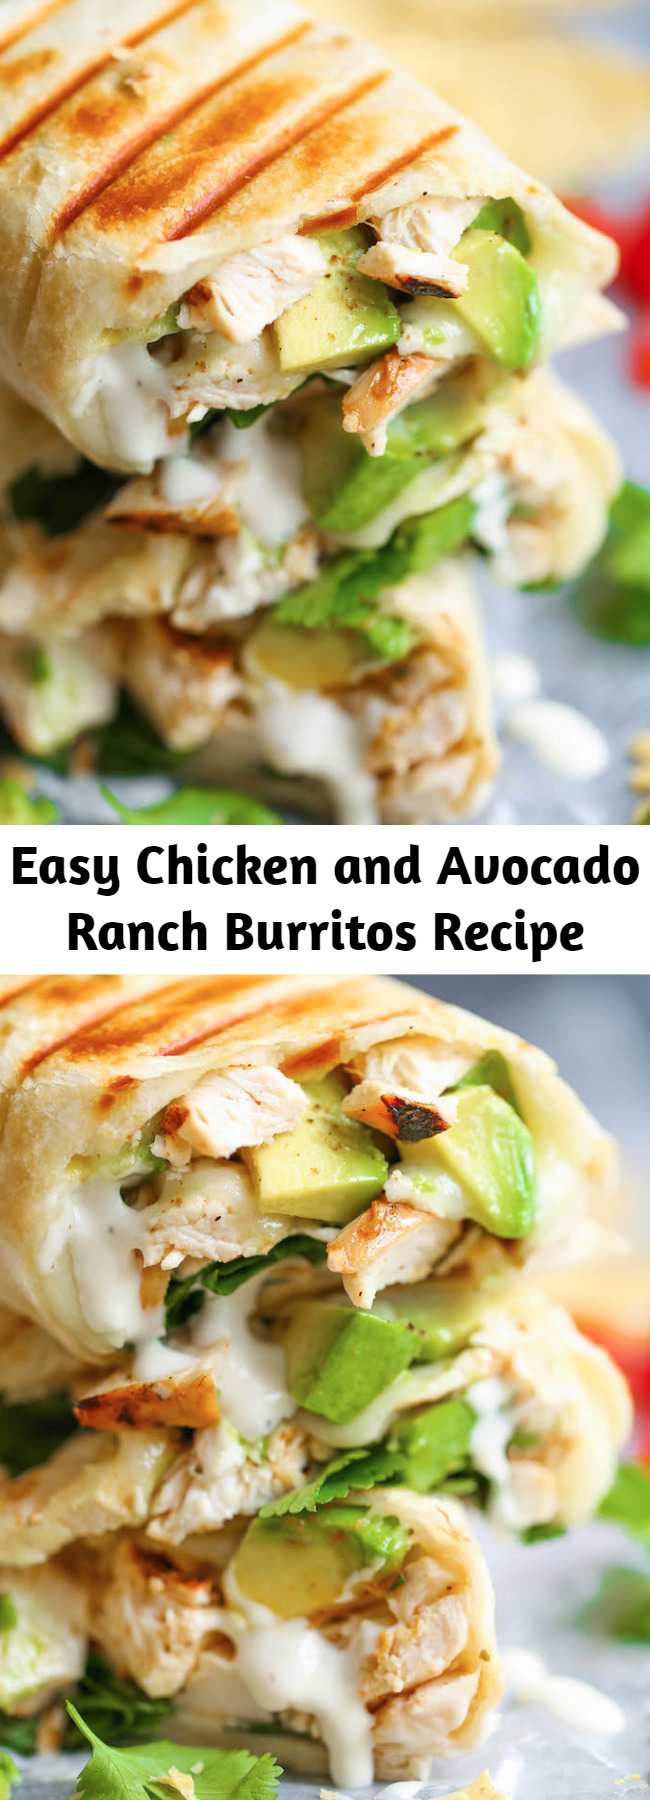 Easy Chicken and Avocado Ranch Burritos Recipe - These come together with just 15 min prep! You can also make this ahead of time and bake right before serving. SO EASY!